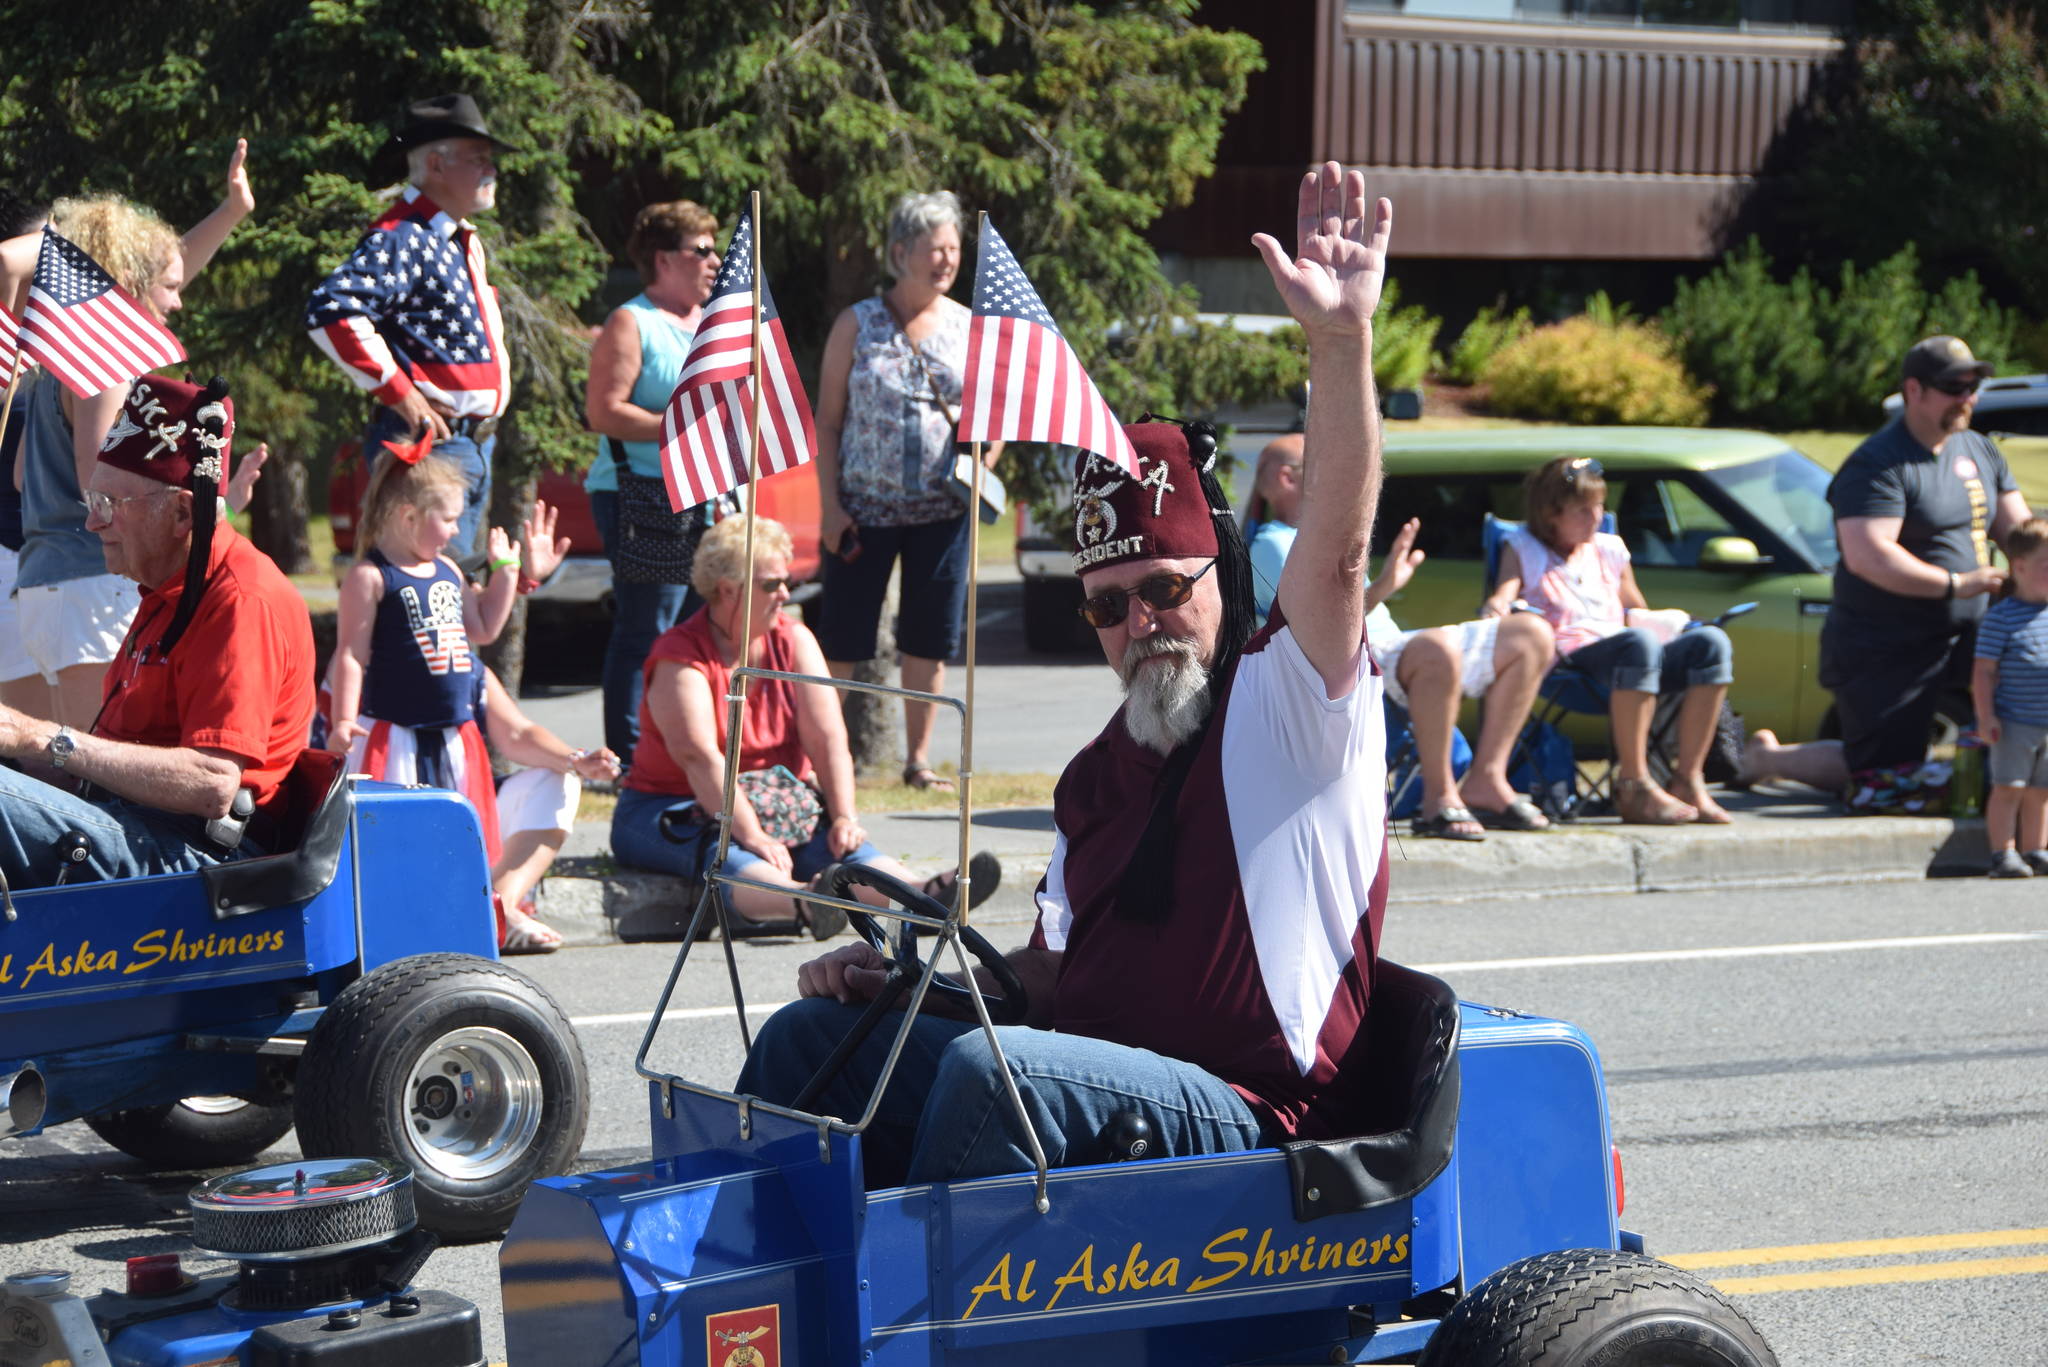 One of the Alaska Shriners waves to the crowd during the July 4th parade in Kenai, Alaska. (Photo by Brian Mazurek/Peninsula Clarion)